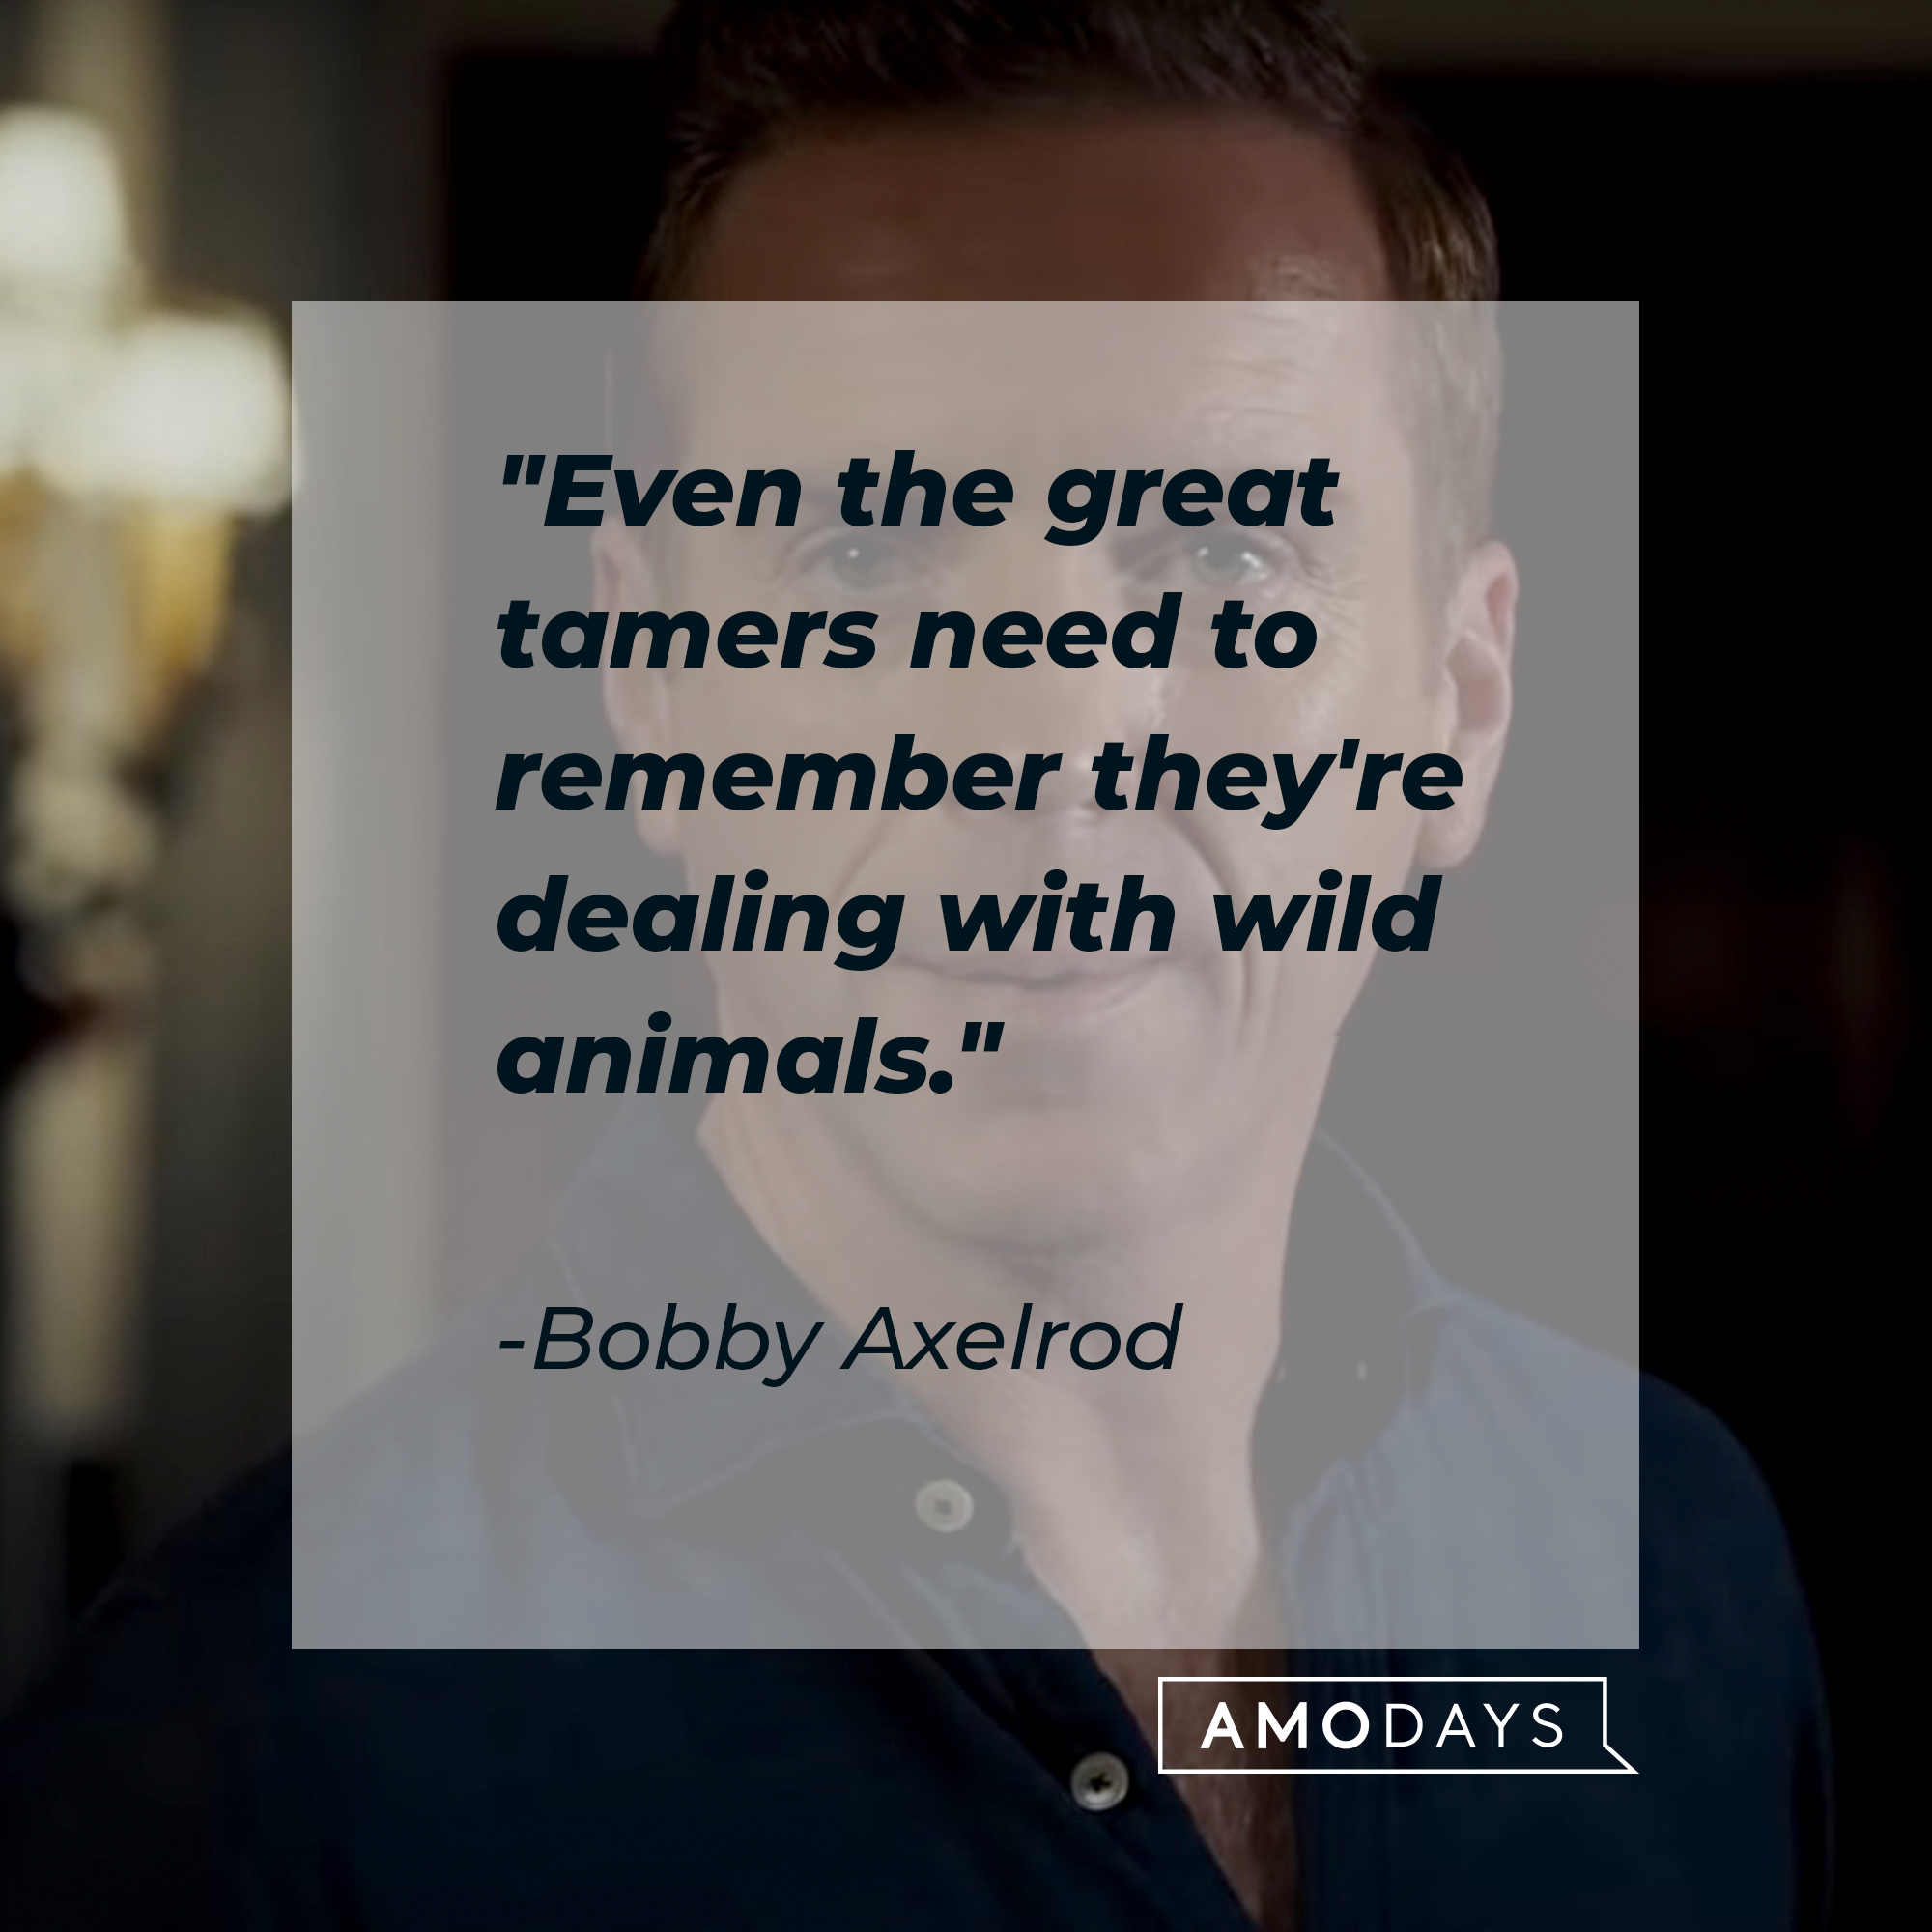 Bobby Axelrod's quote: "Even the great tamers need to remember they're dealing with wild animals." | Source: Youtube.com/BillionsOnShowtime